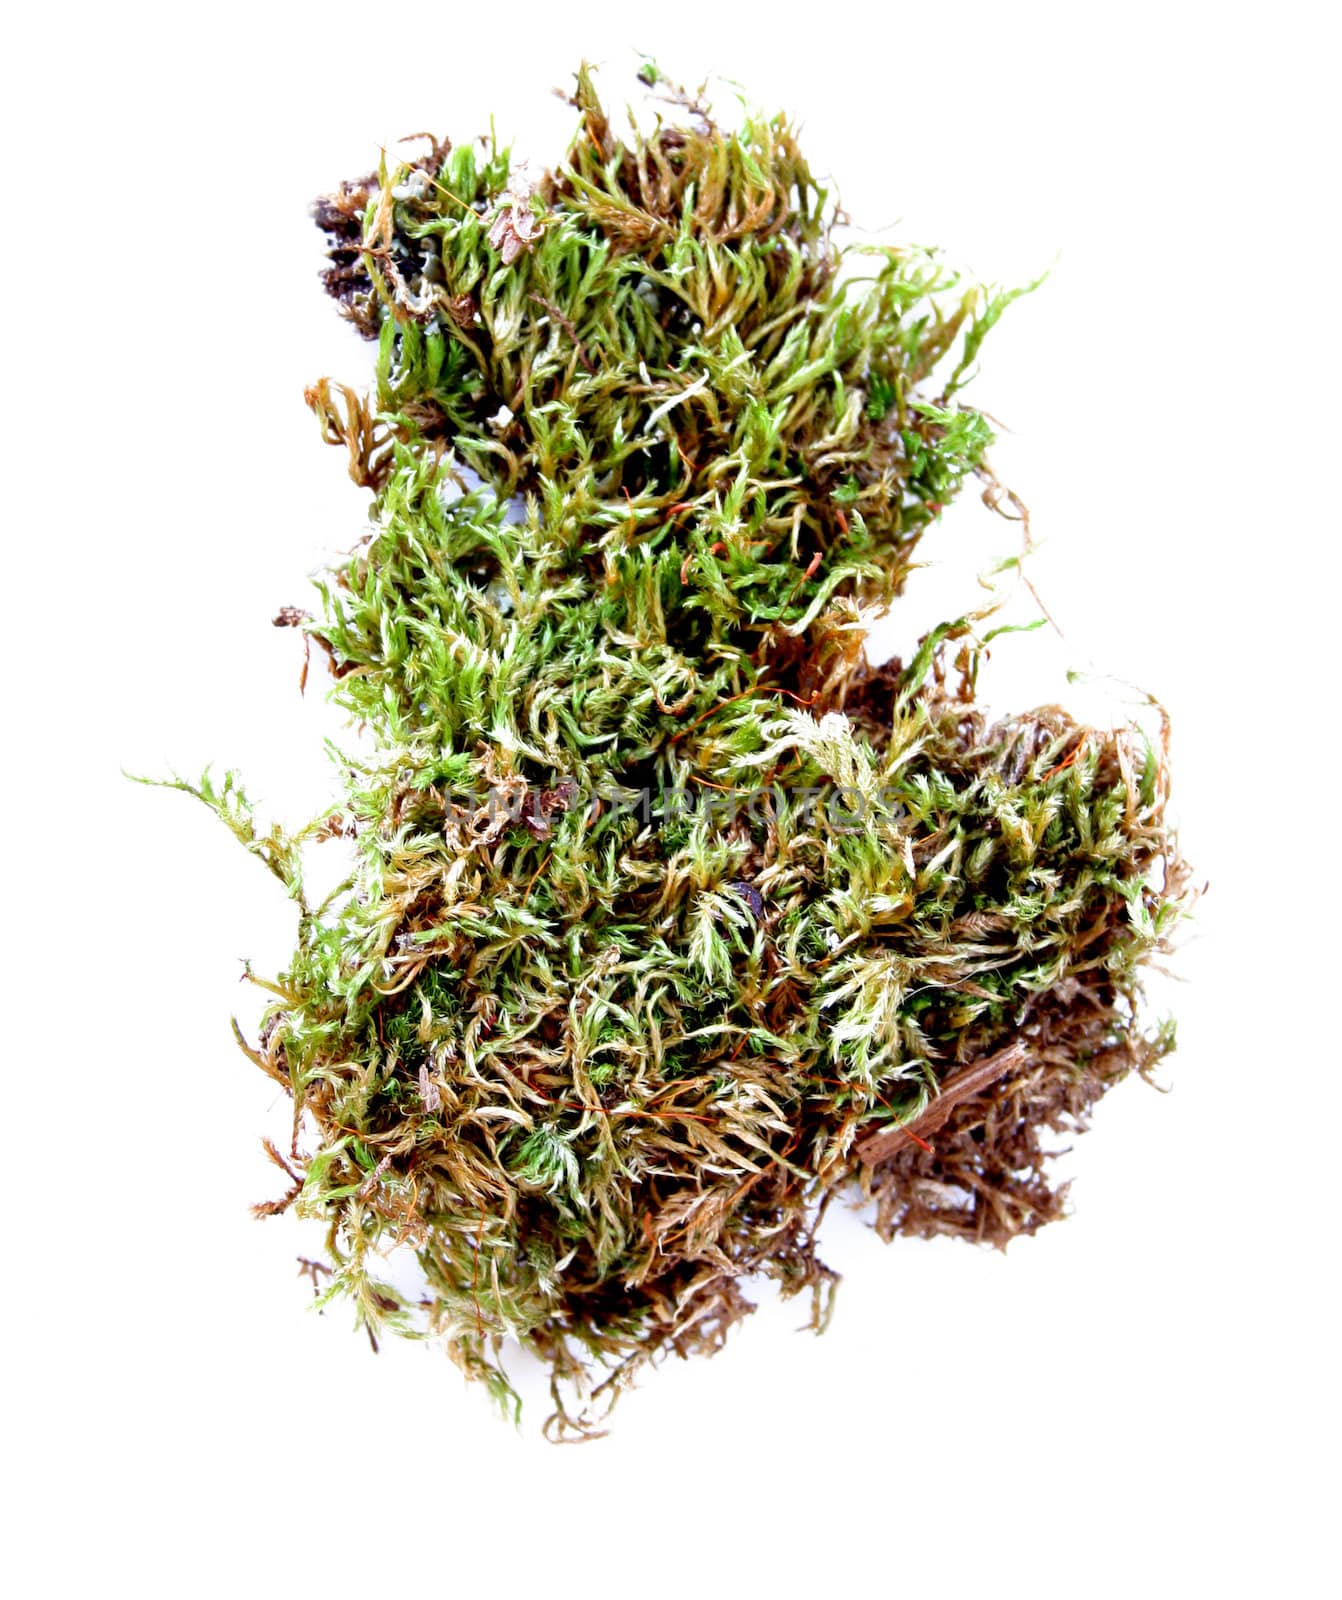 A piece of moss isolated on a white background.